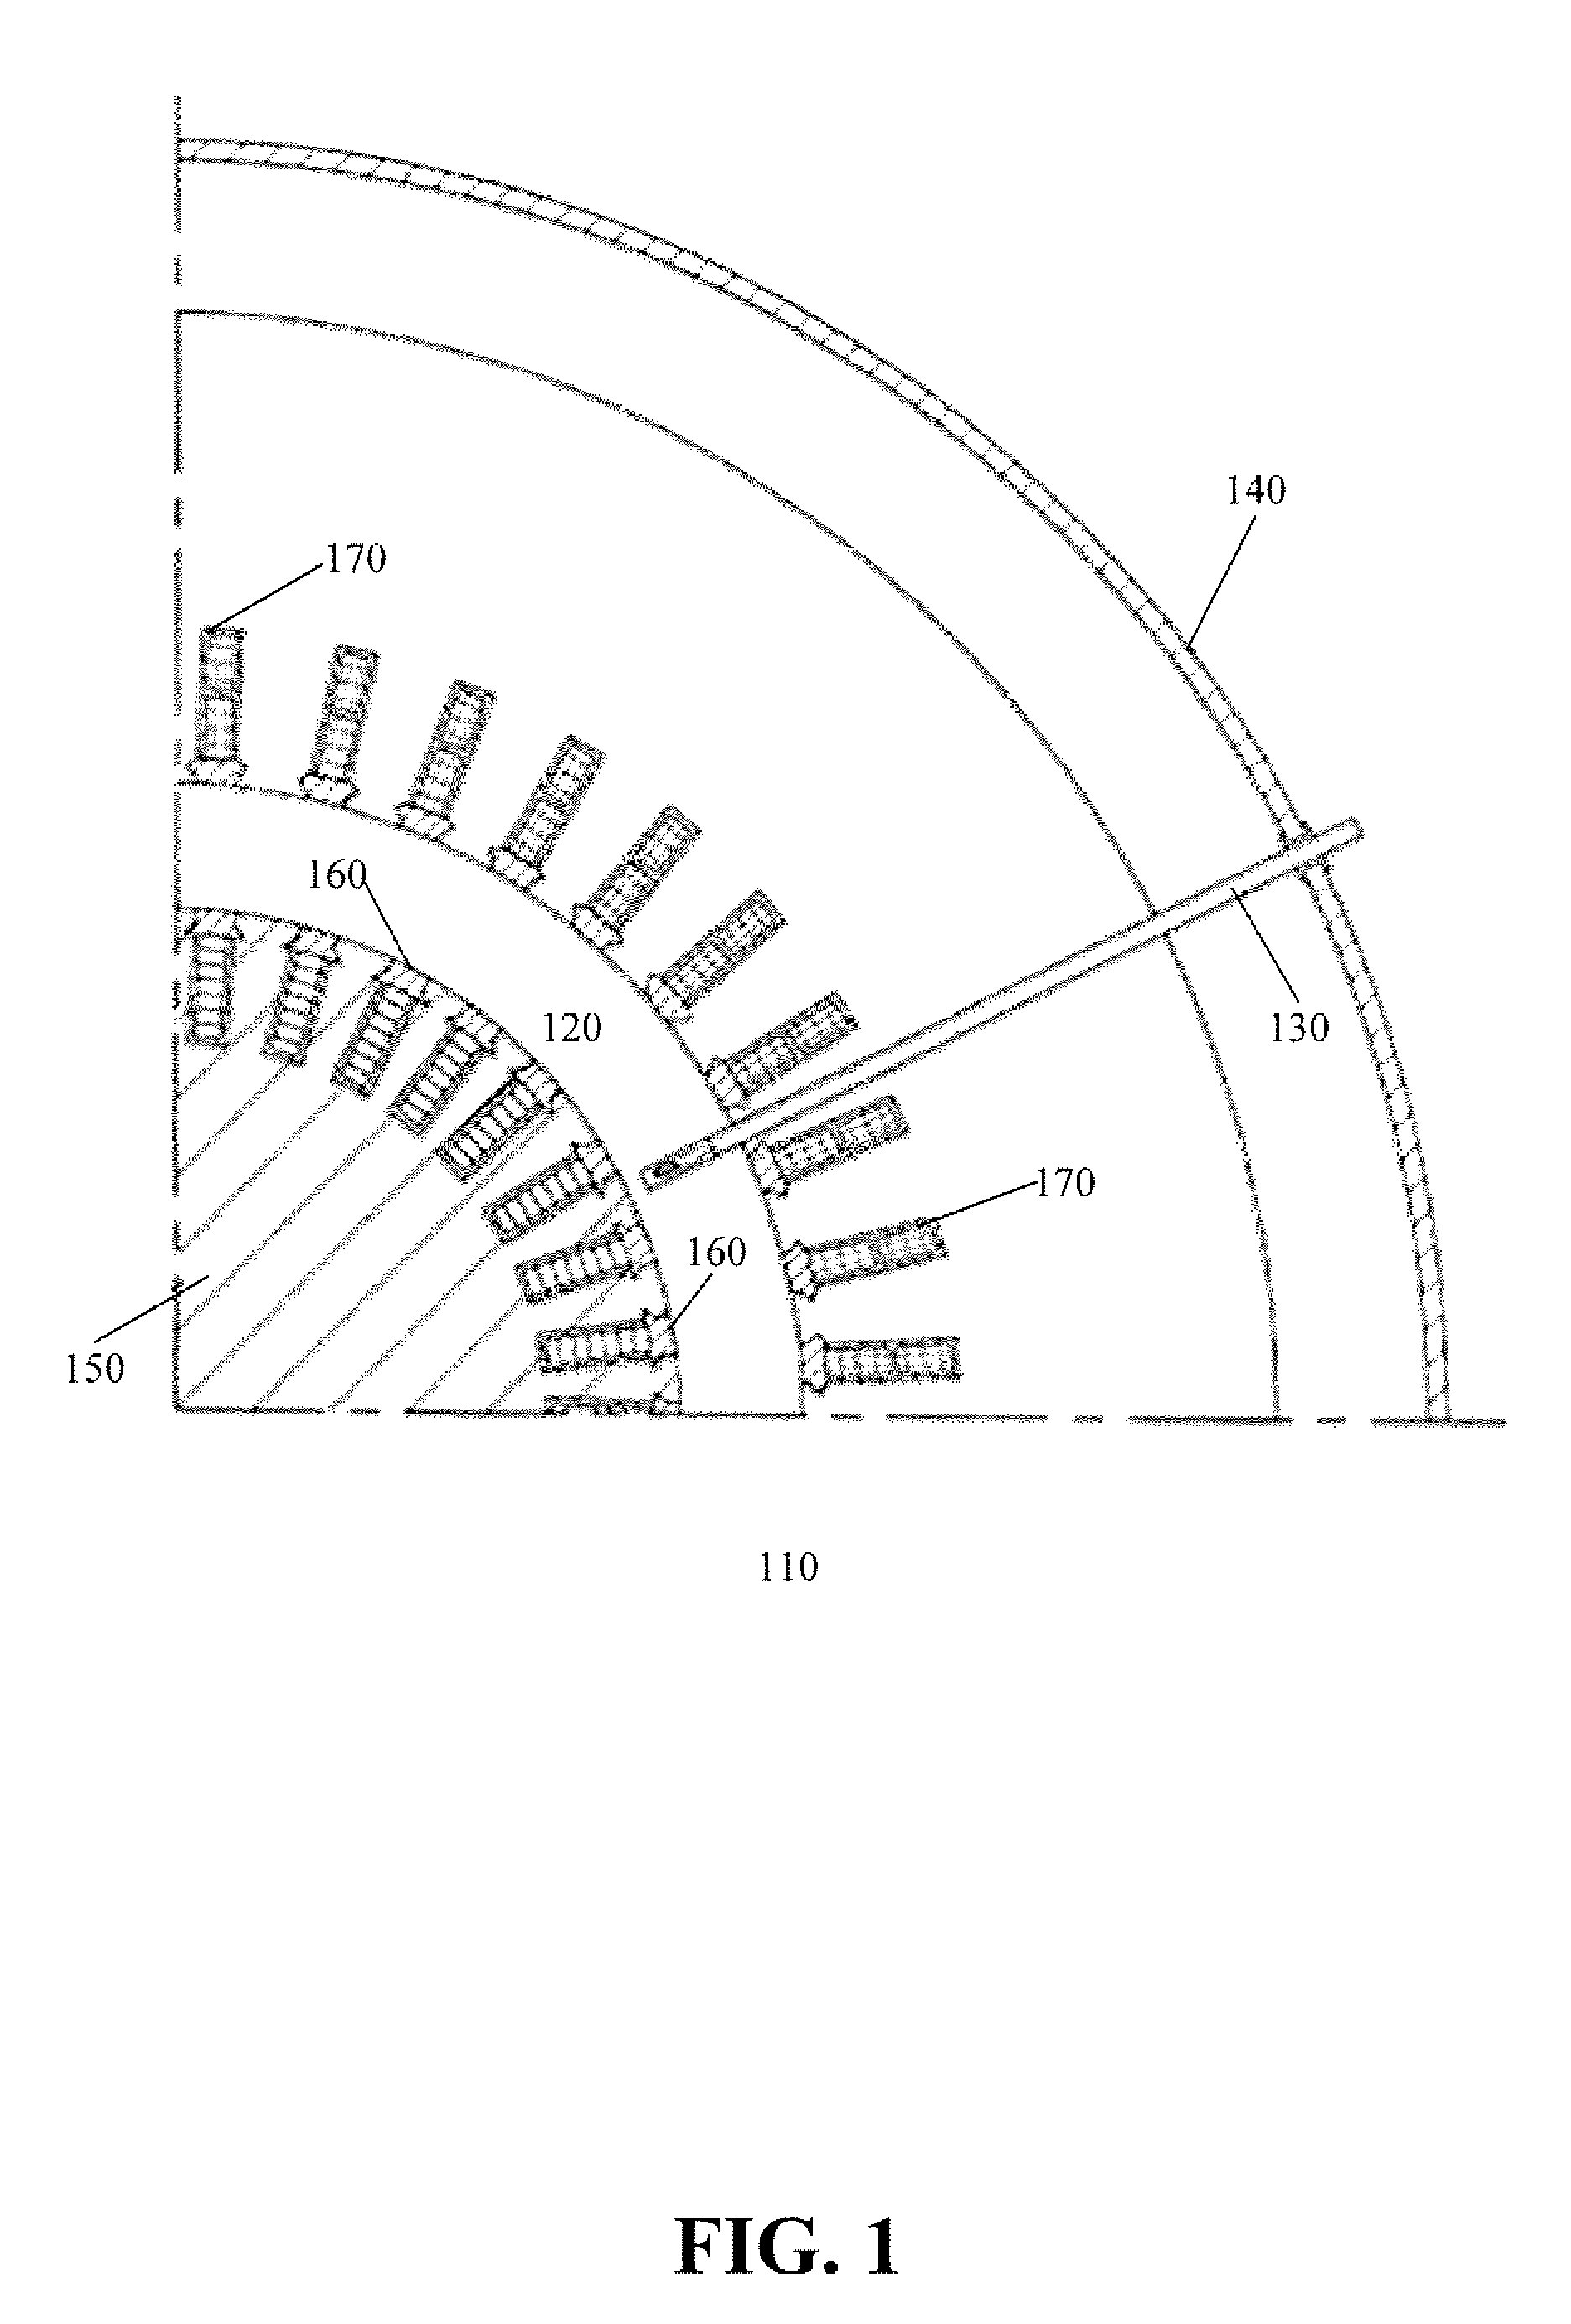 Methods and Systems for Detecting Rotor Field Ground Faults In Rotating Machinery